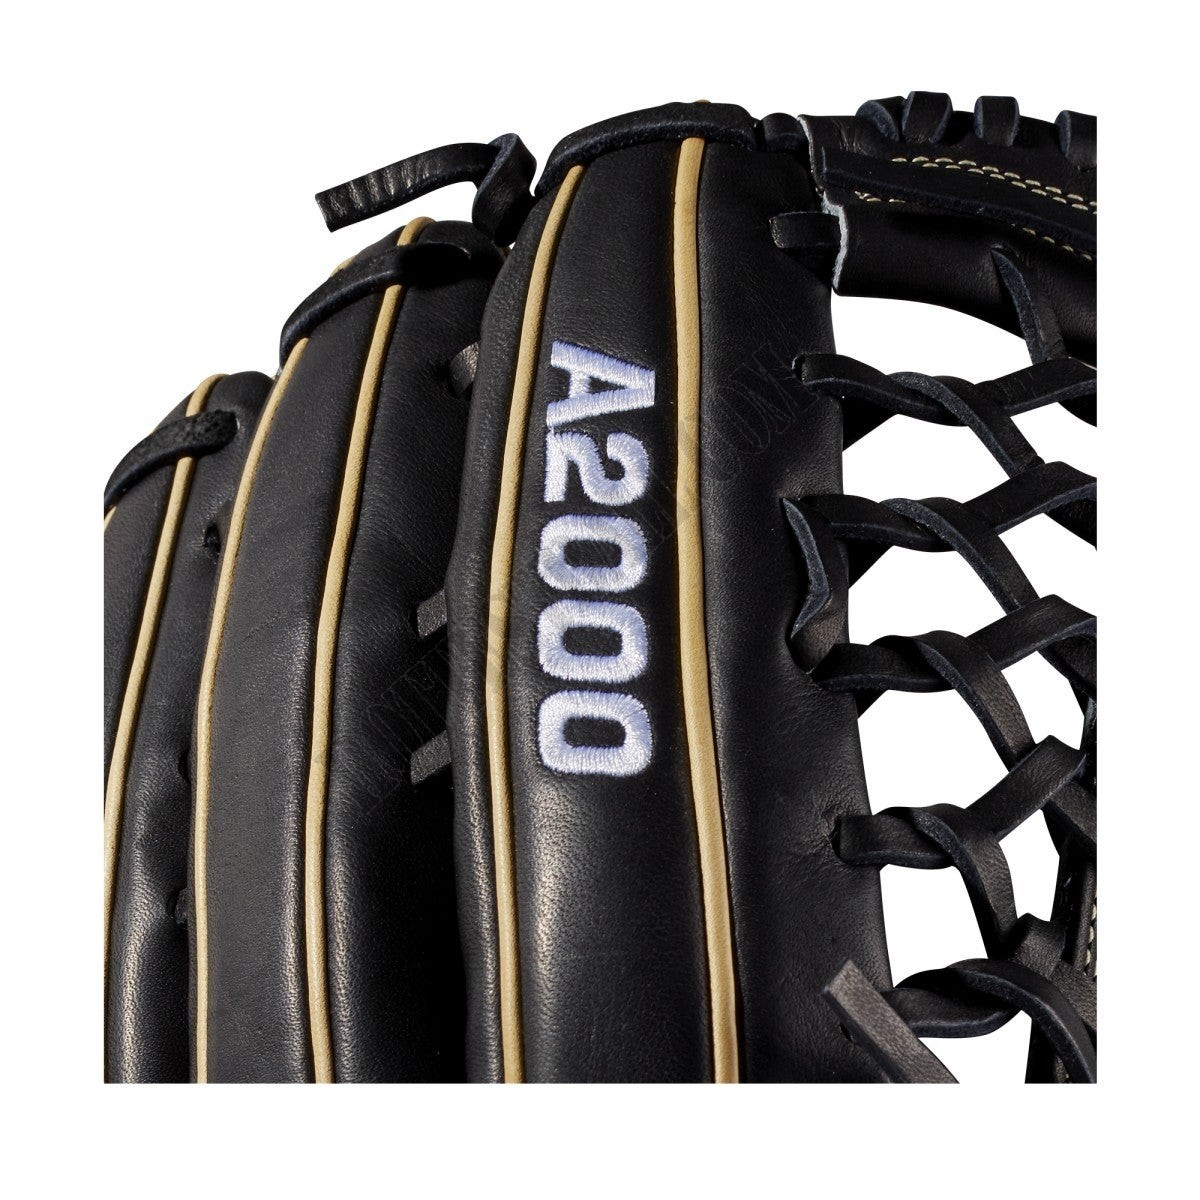 2019 A2000 KP92 12.5" Outfield Baseball Glove ● Wilson Promotions - -3